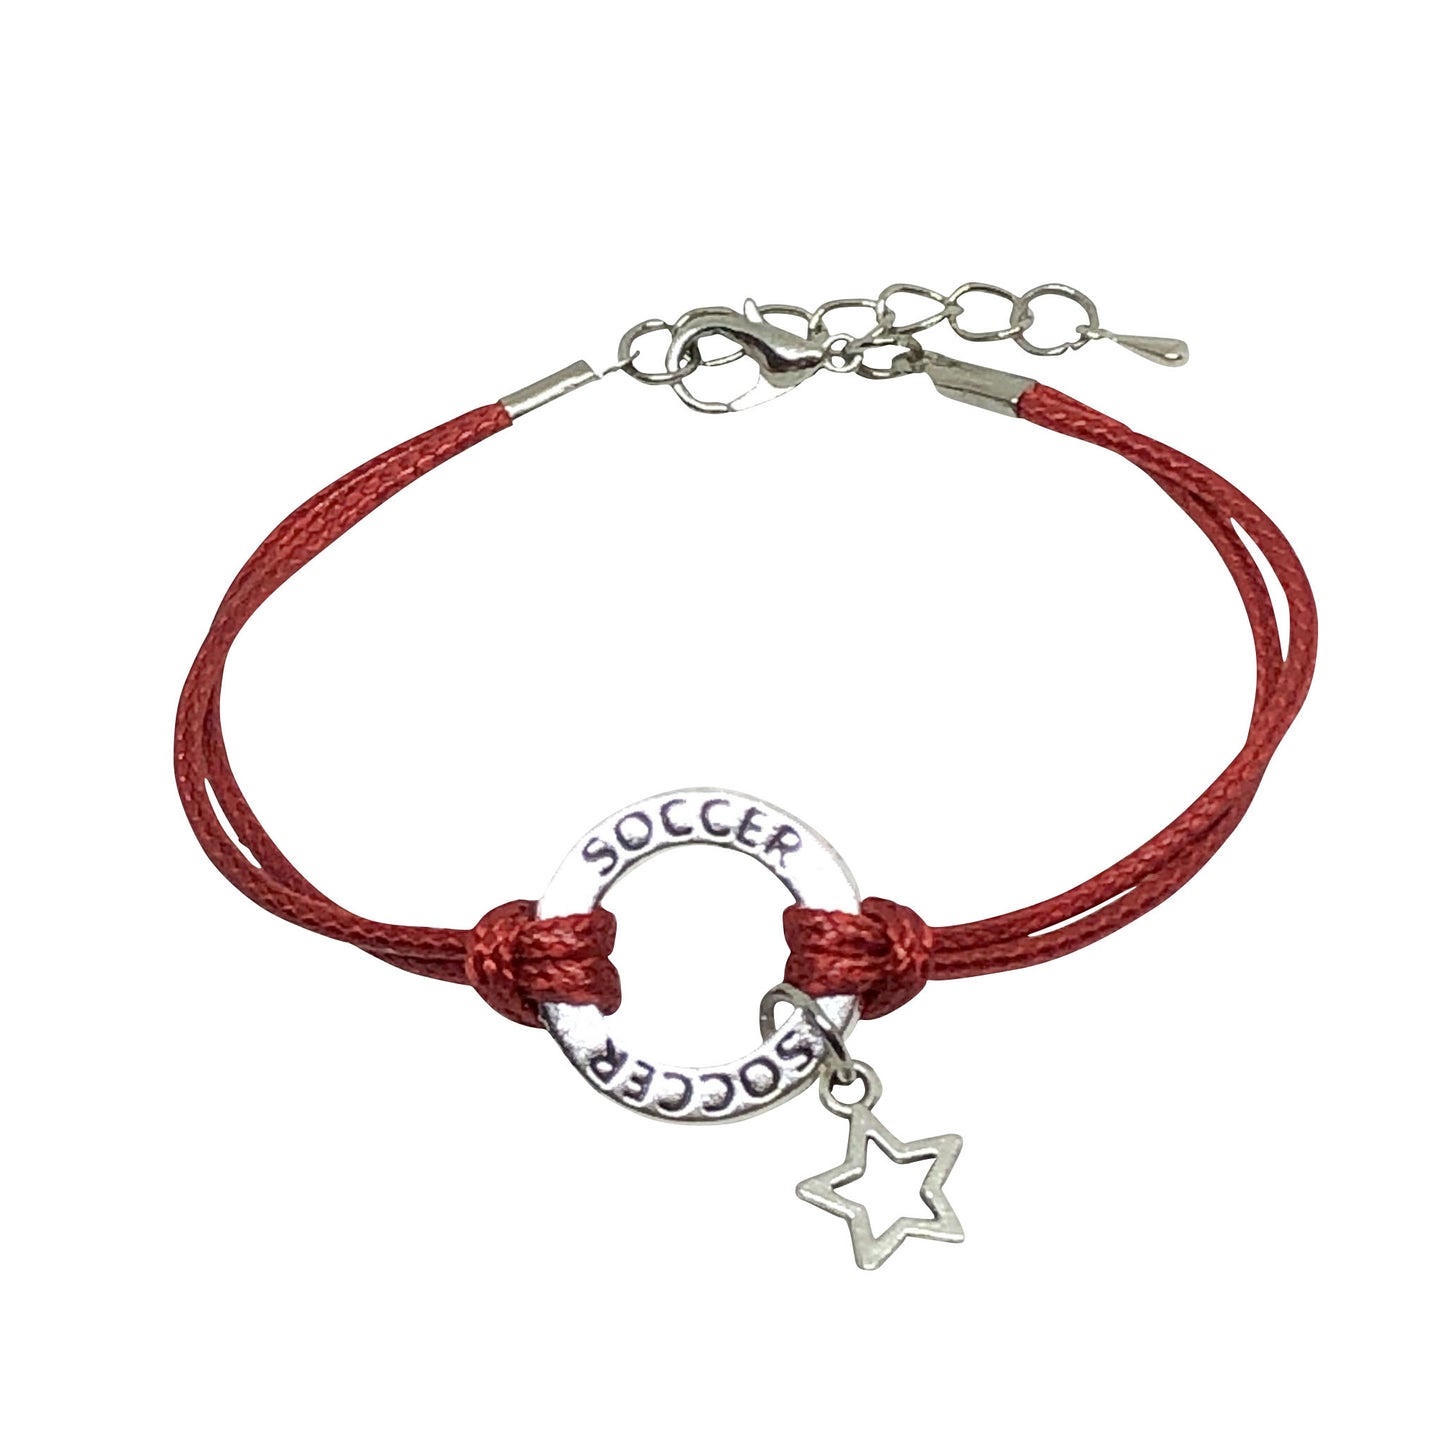 Soccer Charm Bracelet - 6 COLORS - Cheer and Dance On Demand